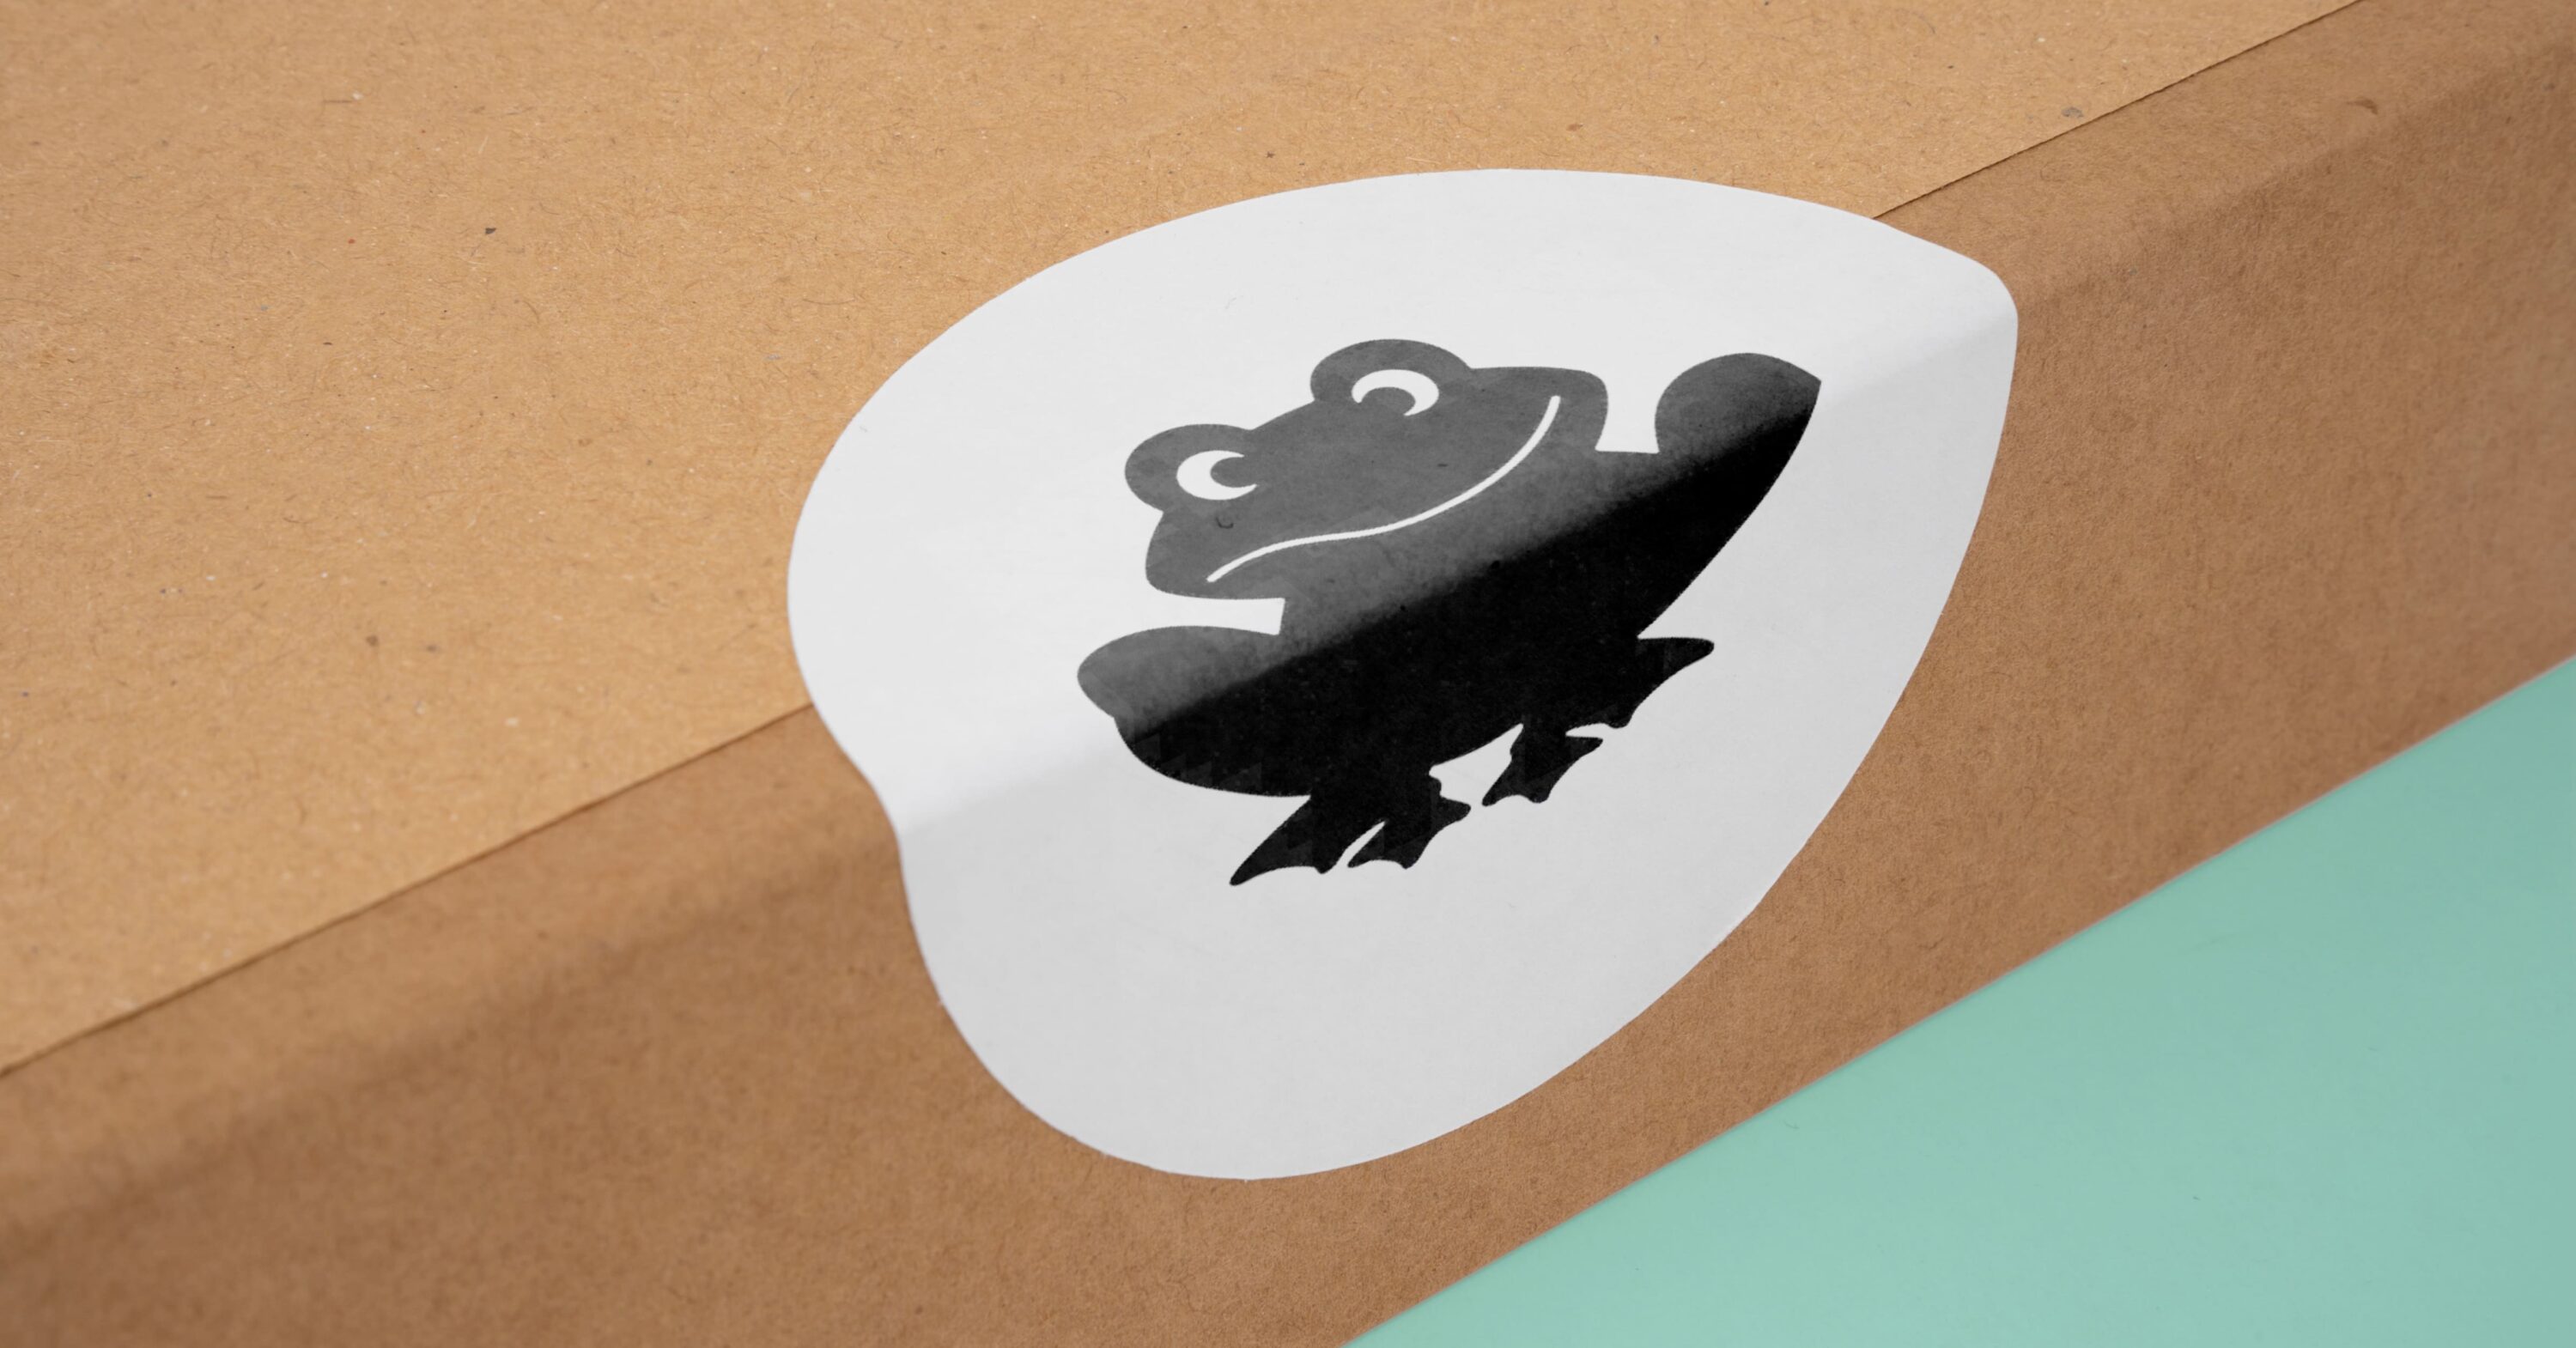 Frog sticker on the side of a cardboard box.